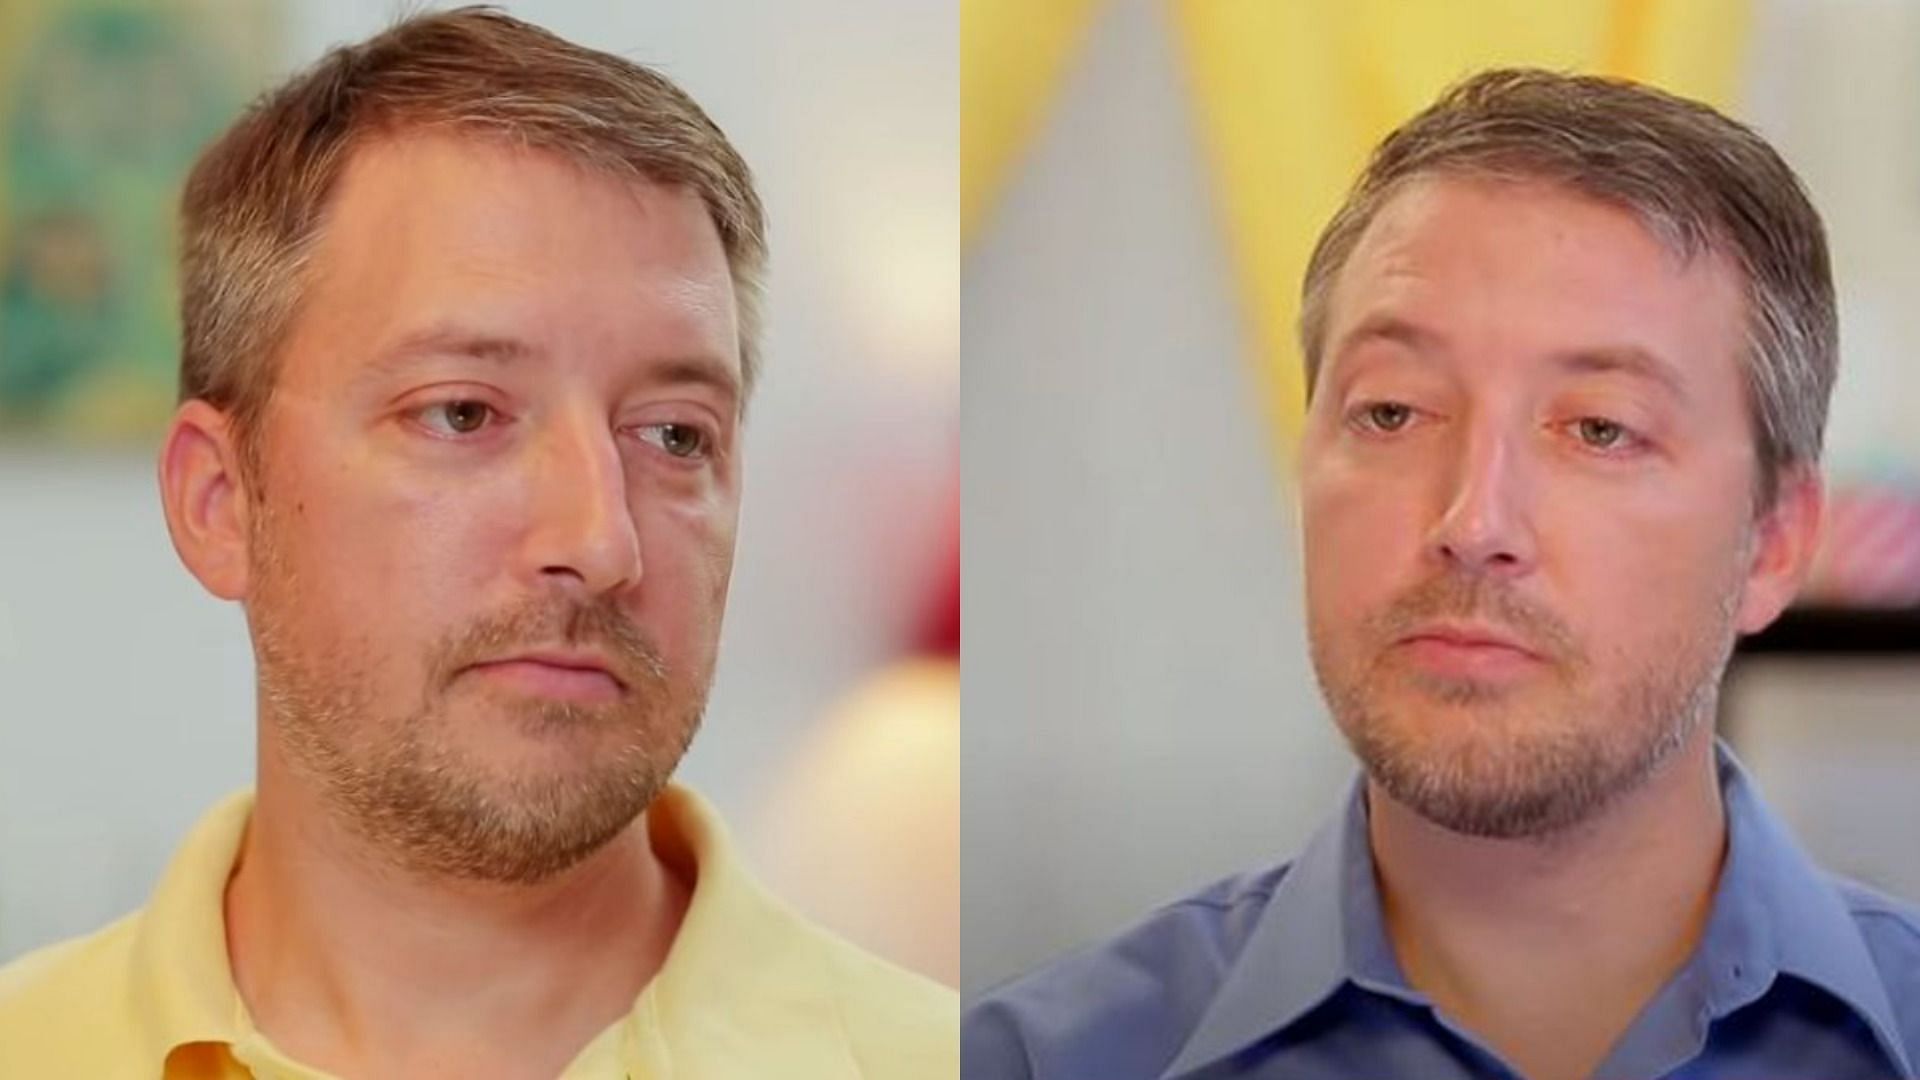 &#039;90 Day Fiance&#039; alum Jason Hitch passed away due to COVID-19 complications (Image via TLC/90 Day Fiance)